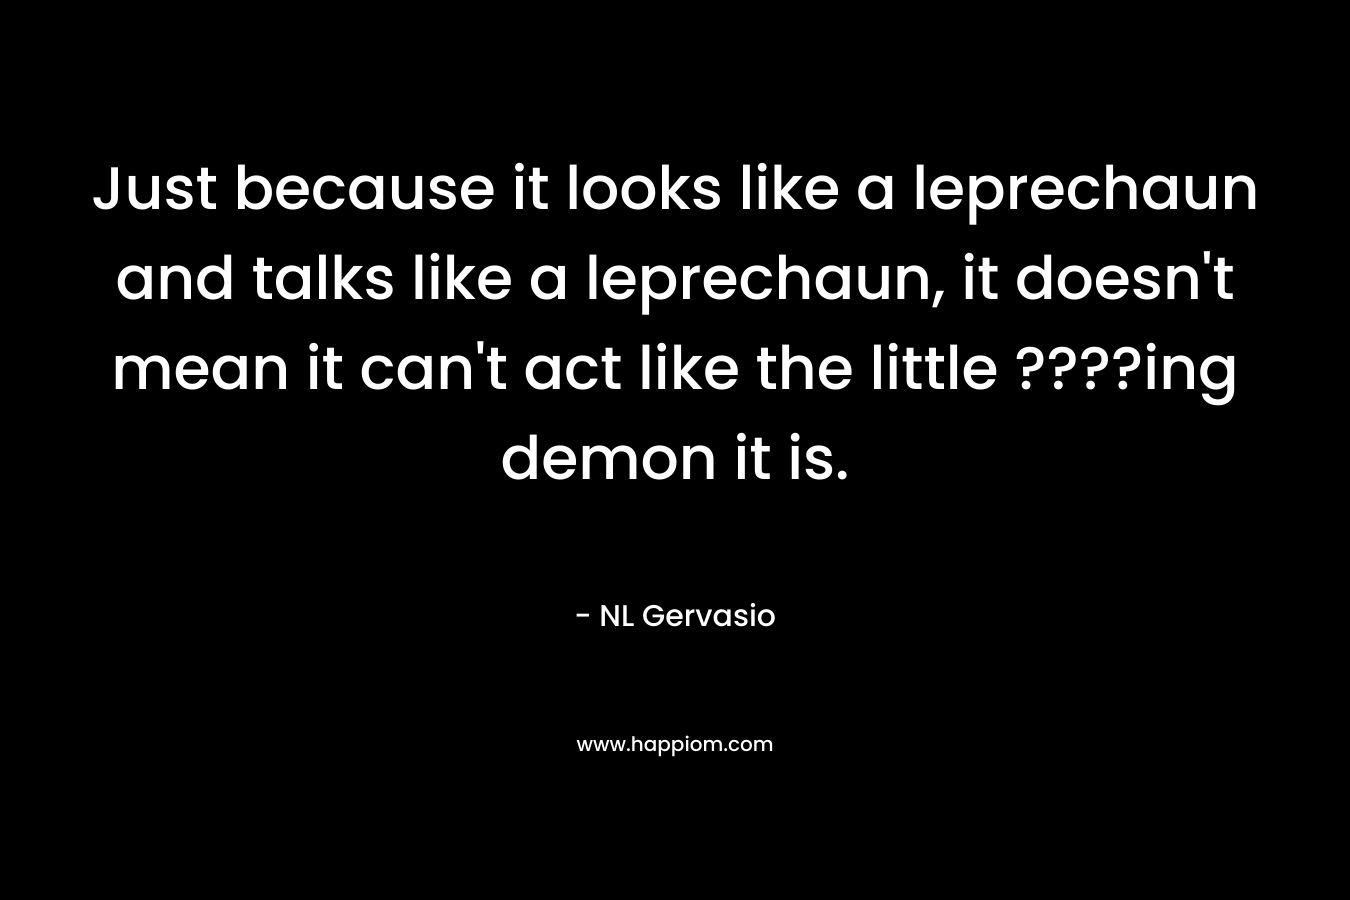 Just because it looks like a leprechaun and talks like a leprechaun, it doesn't mean it can't act like the little ????ing demon it is.